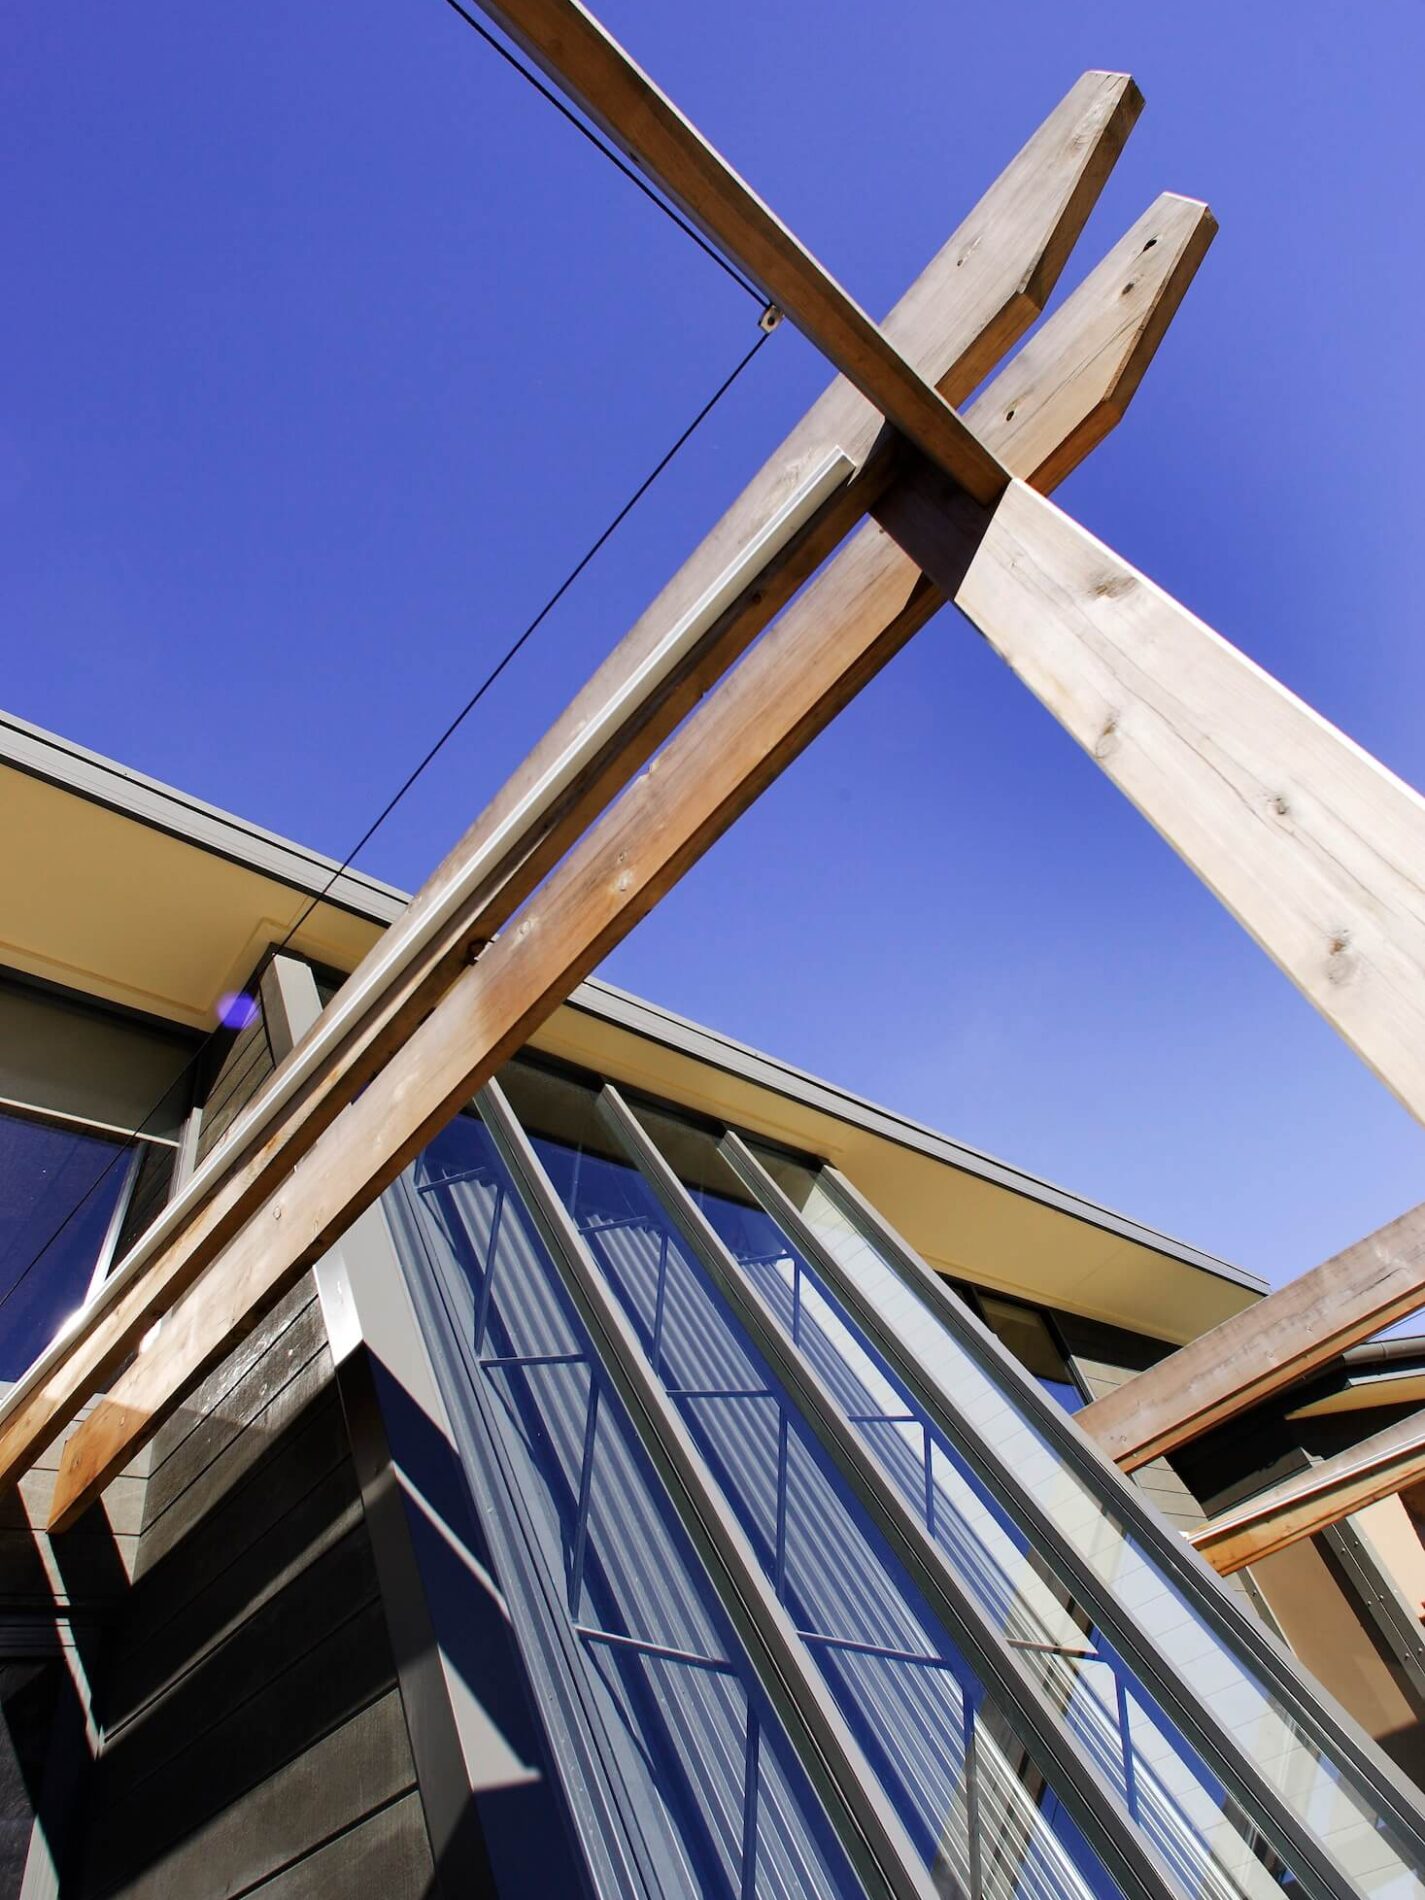 Looking up at timber posts, pully wire attached, facade of building and blue sky behind